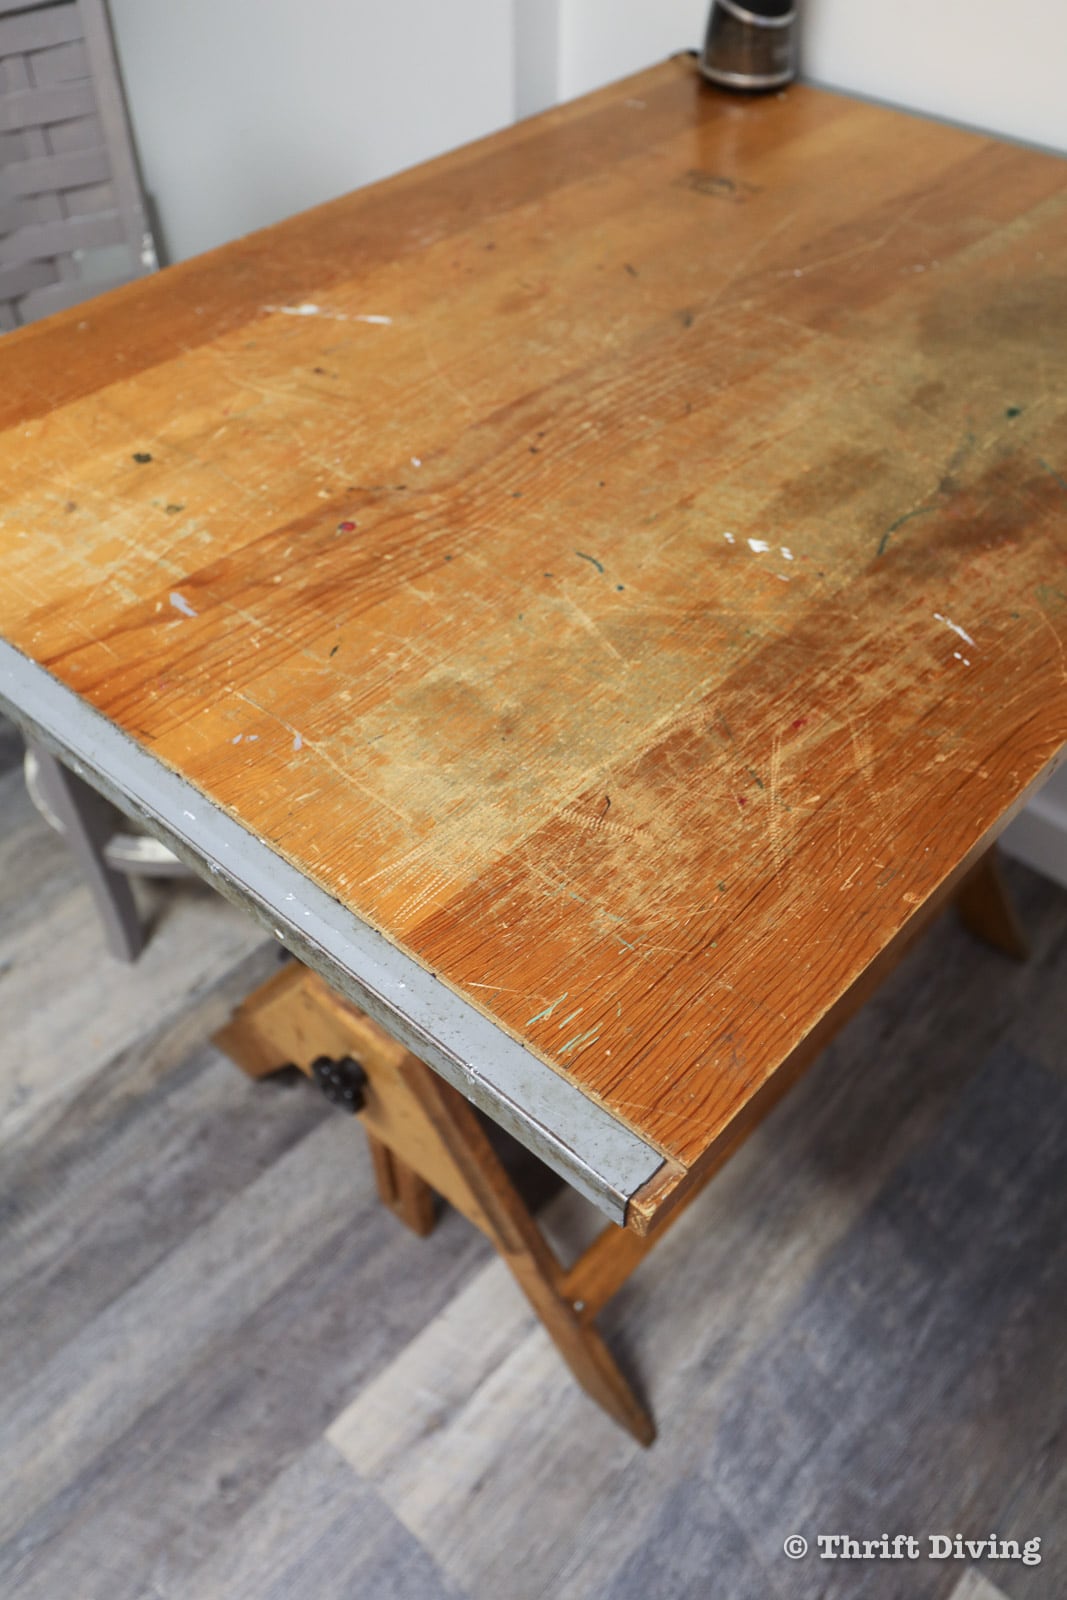 How to Refinish Wood Furniture with Eco-Friendly Stripper and Stain - This is the "before" of the Anco Bilt vintage drafting table found at the thrift store for only $30! The table top needed to be refinished: stripped, sanded, stained, and waxed. - Thrift Diving